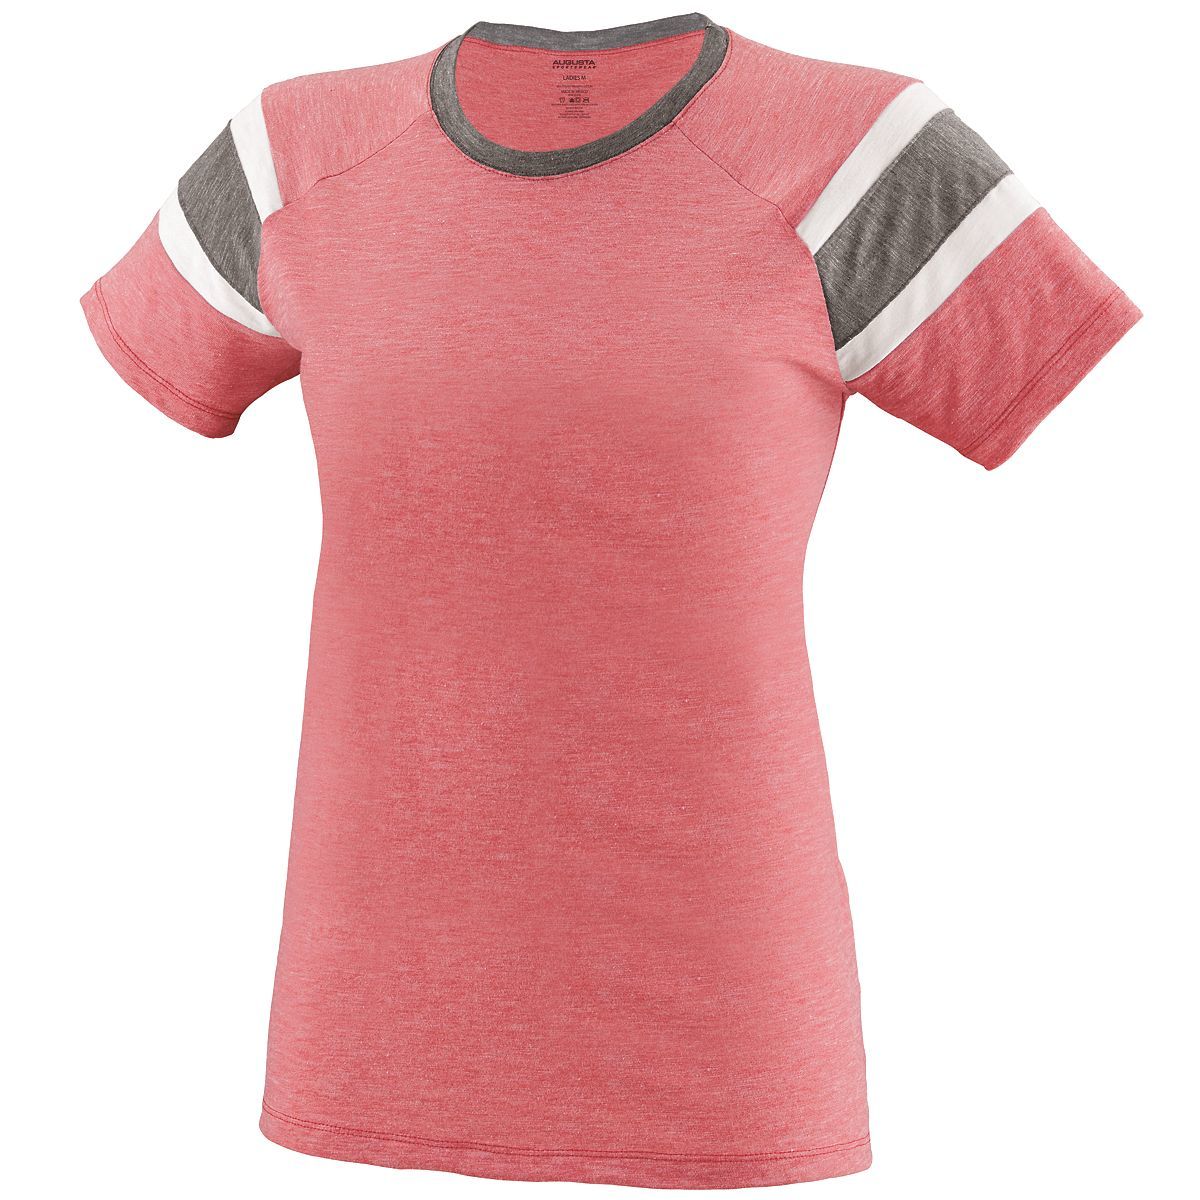 Augusta Sportswear Girls Fanatic Tee in Red/Slate/White  -Part of the Girls, T-Shirts, Augusta-Products, Girls-Tee-Shirt, Shirts product lines at KanaleyCreations.com